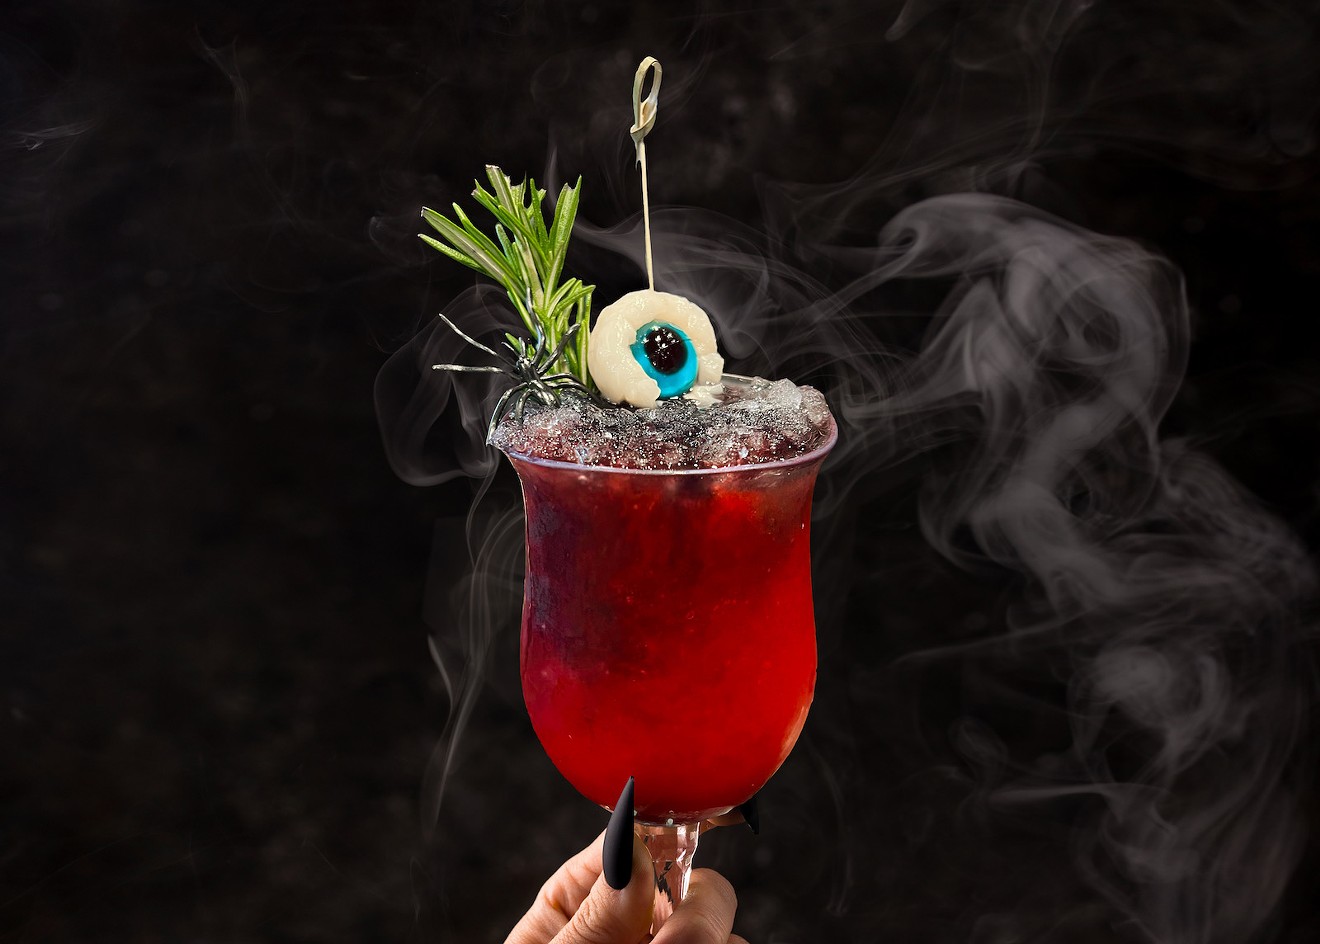 Celebrate Halloween with these spooky Miami cocktails.